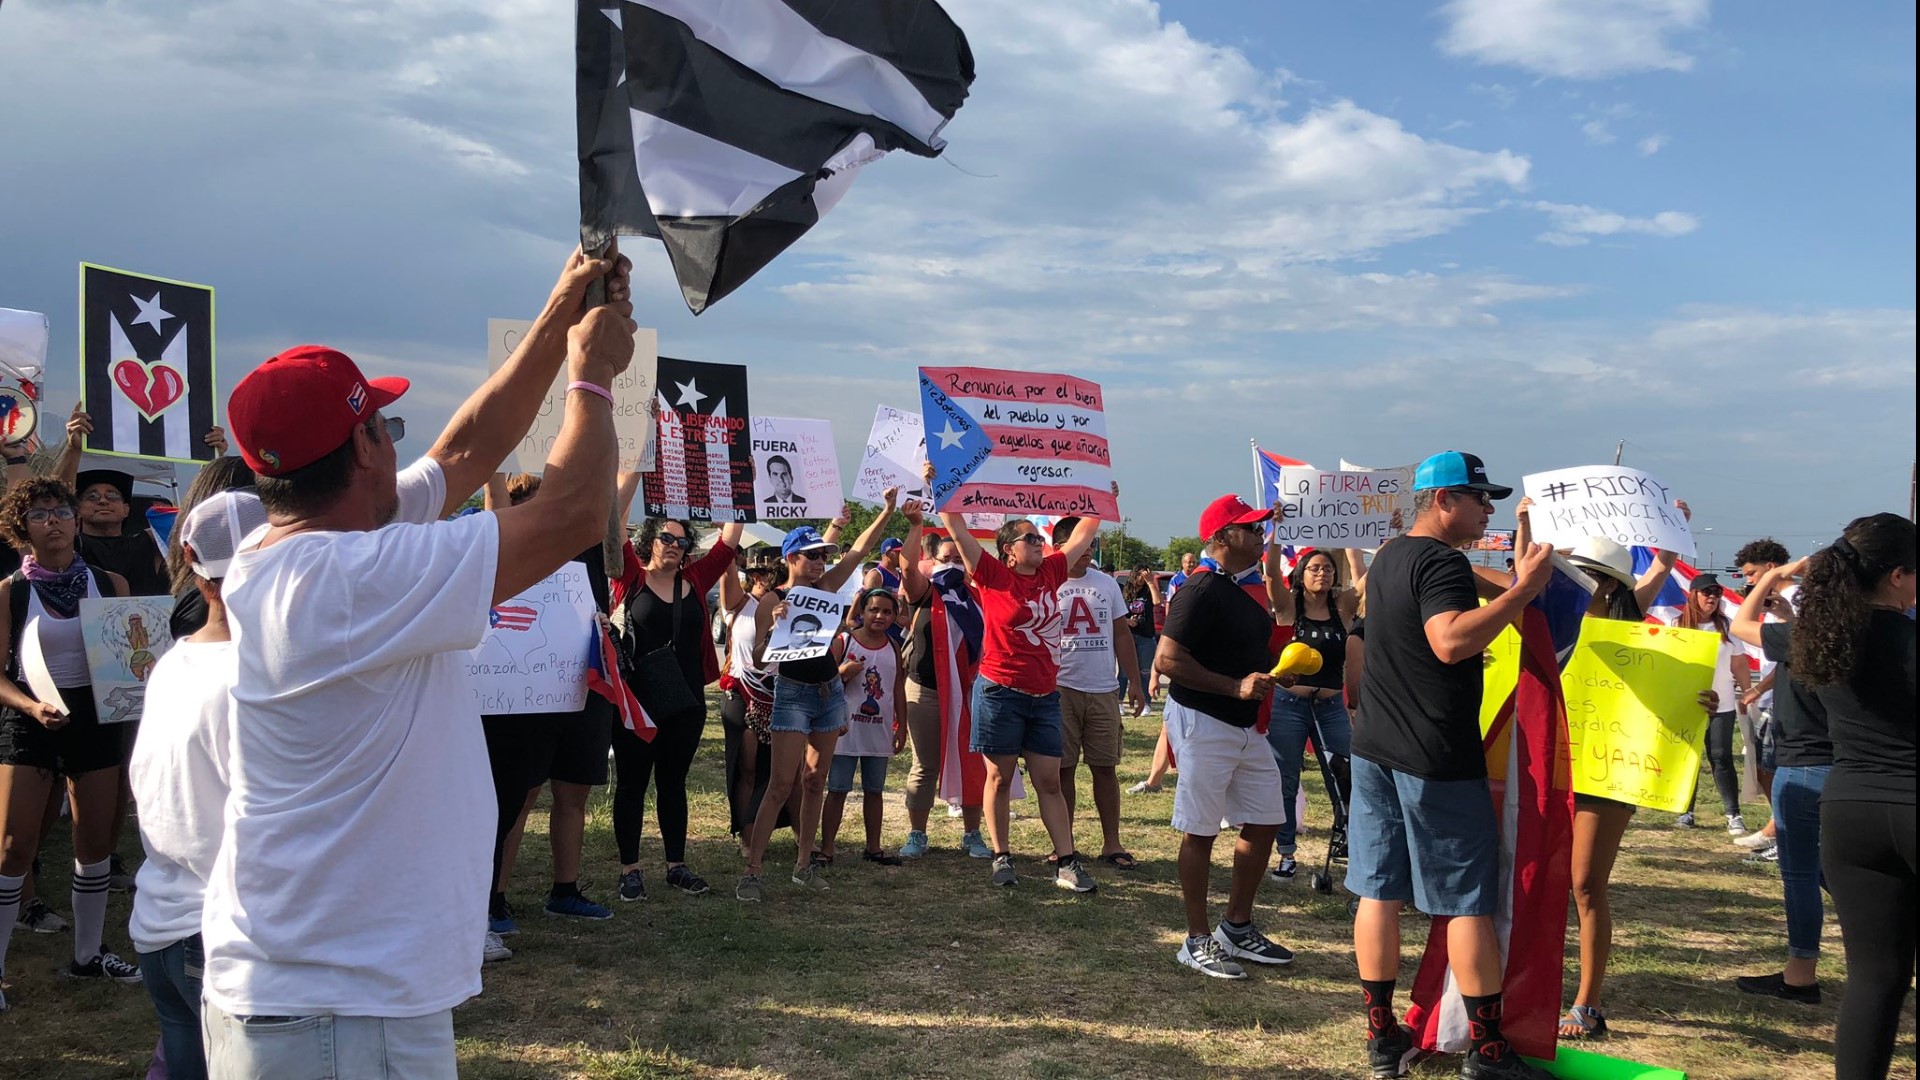 After nearly 900 pages of chats leaked from the governor of Puerto Rico, protesters there and here in Central Texas, are demanding that he step down.